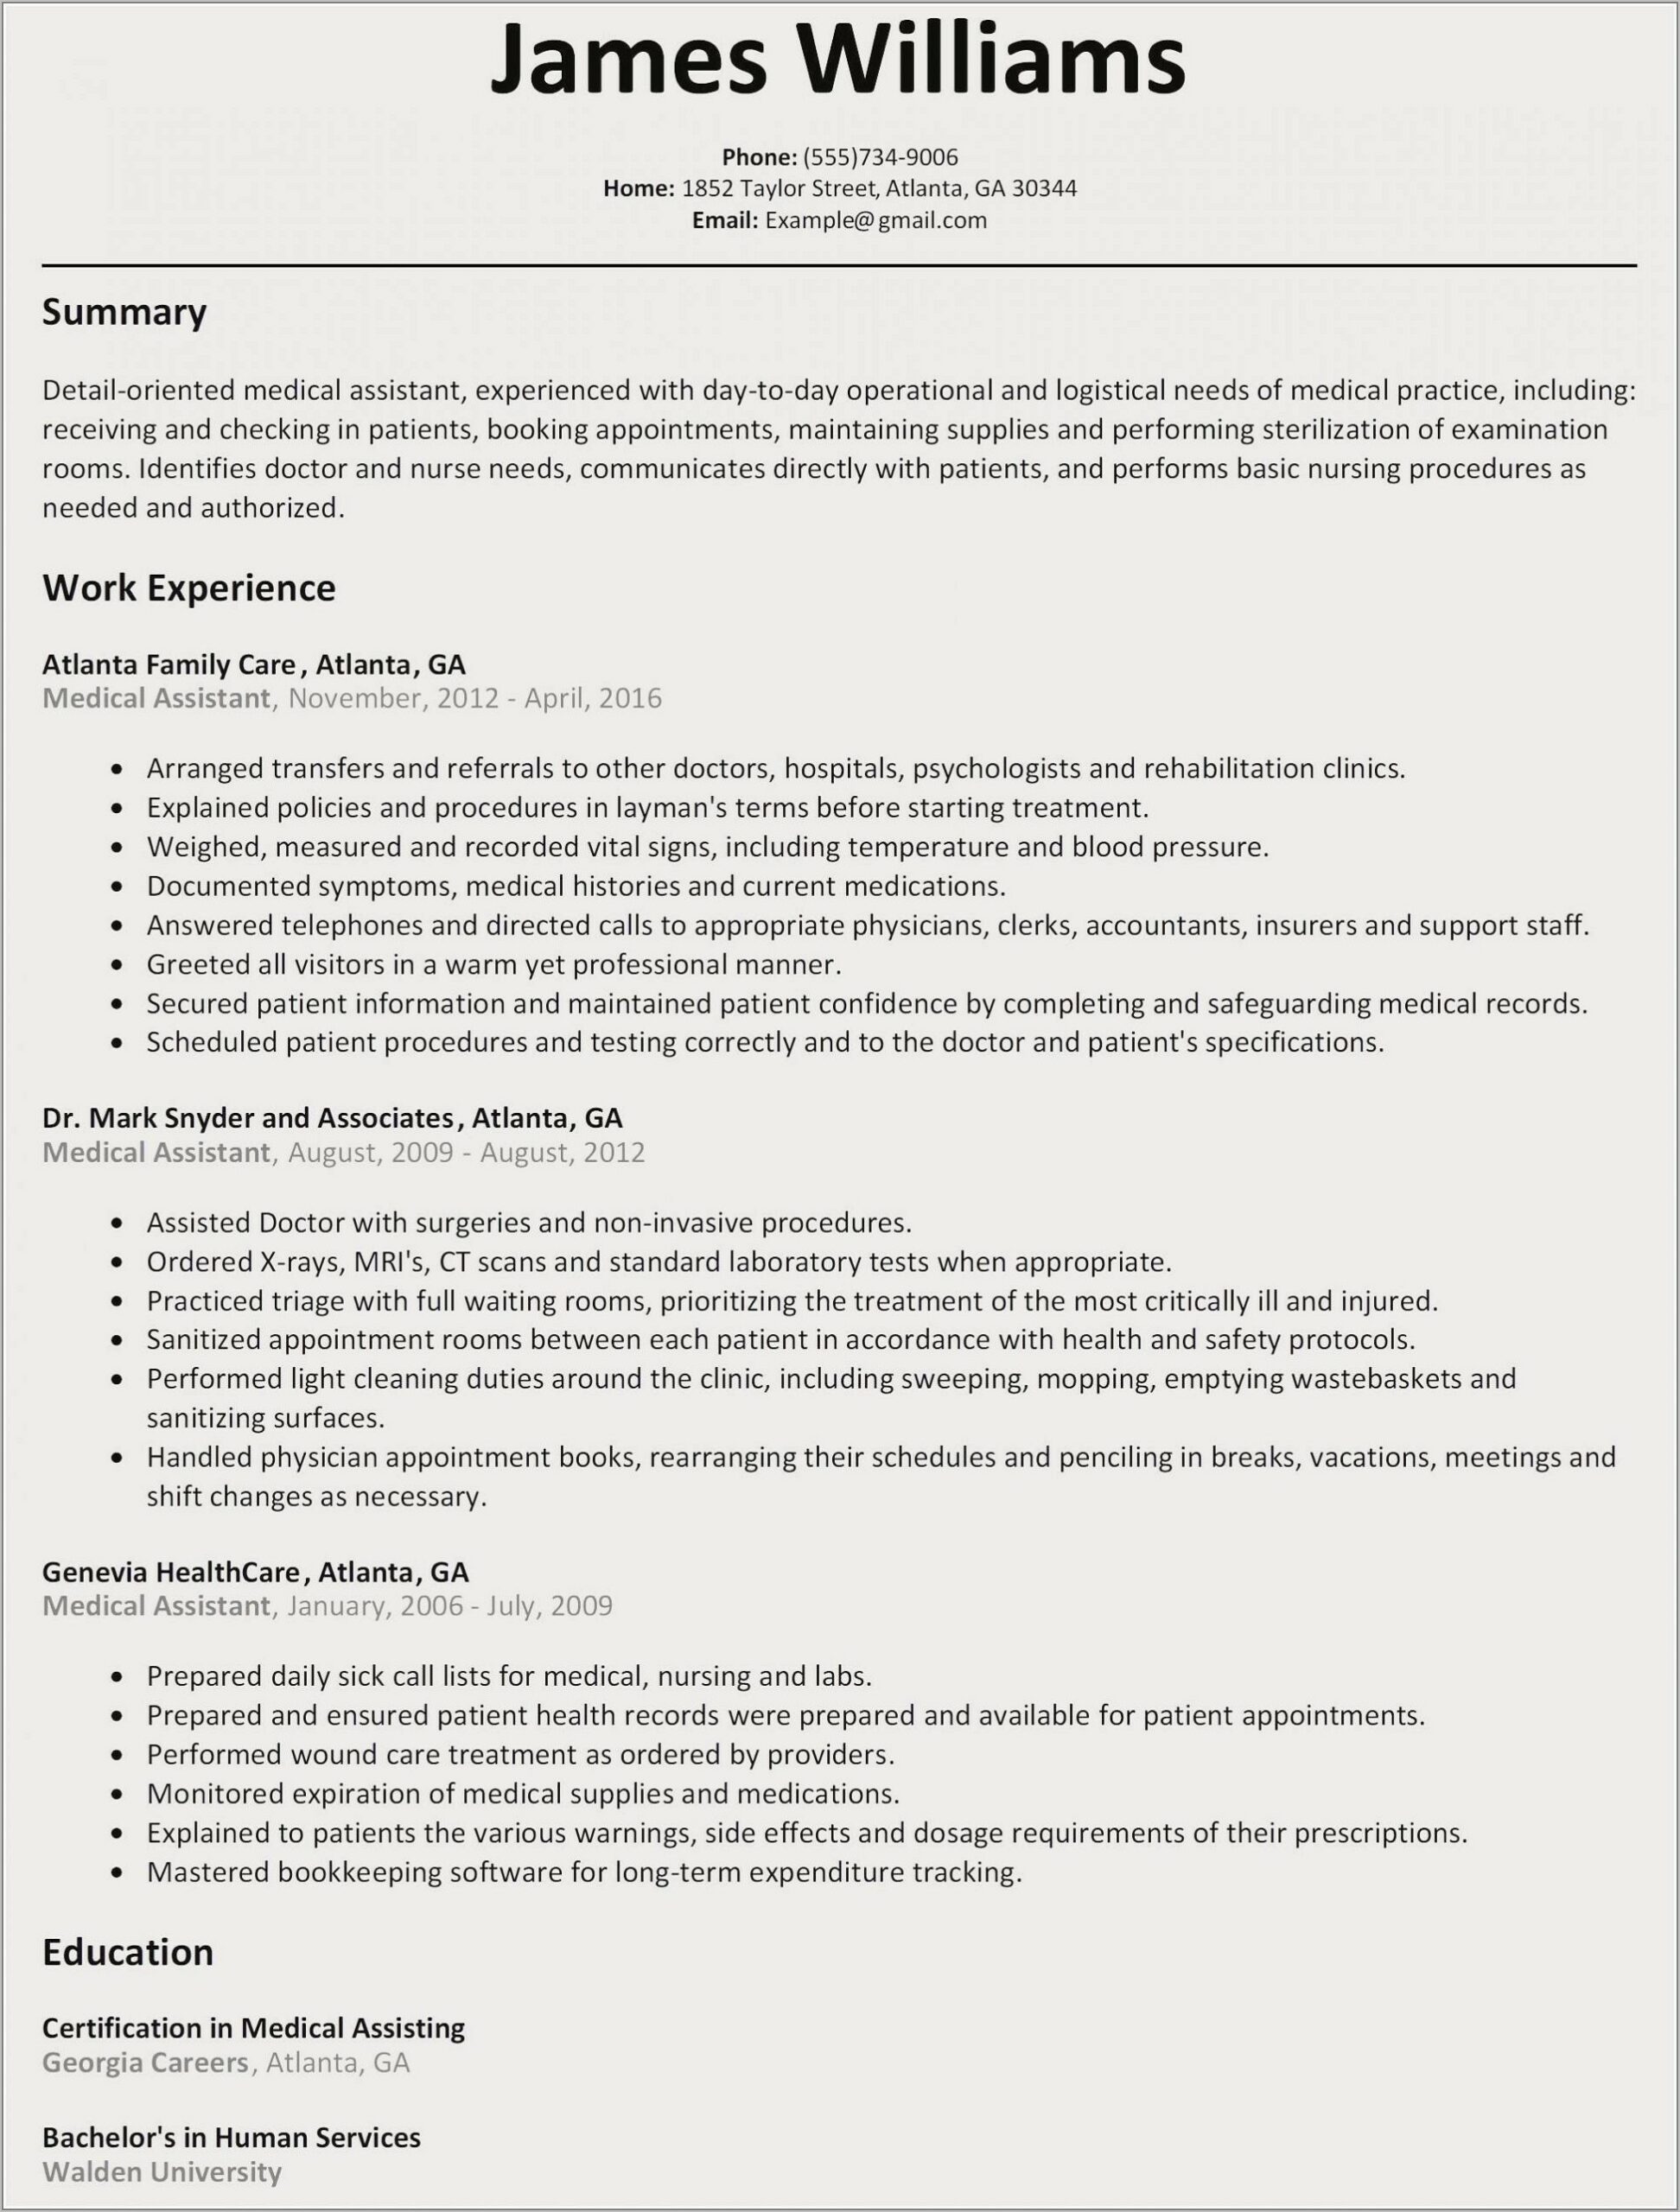 Resume Examples For Electrical Engineers